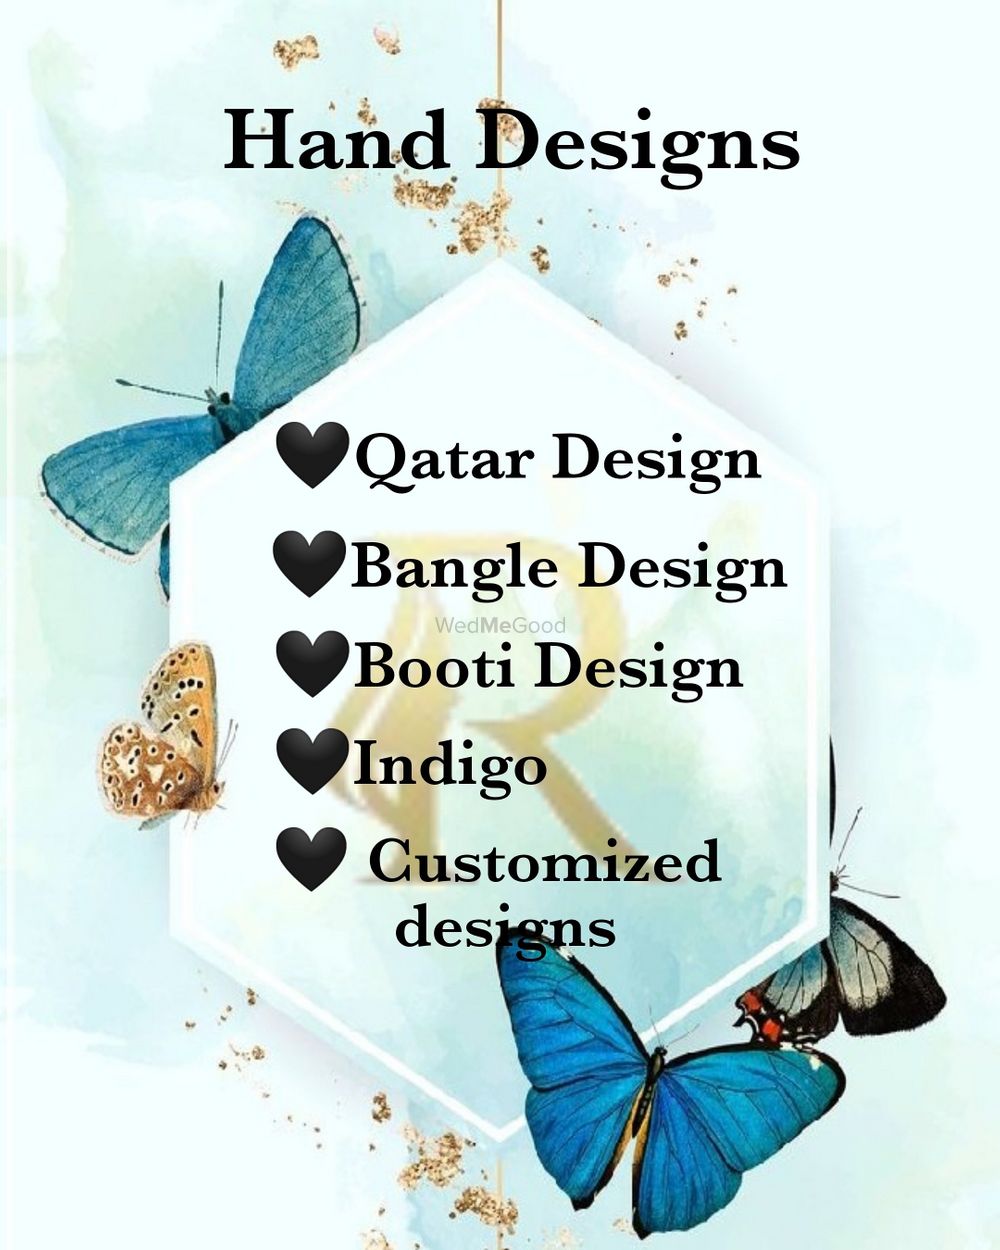 Photo From Types of designs - By Glowing Hands Dubai